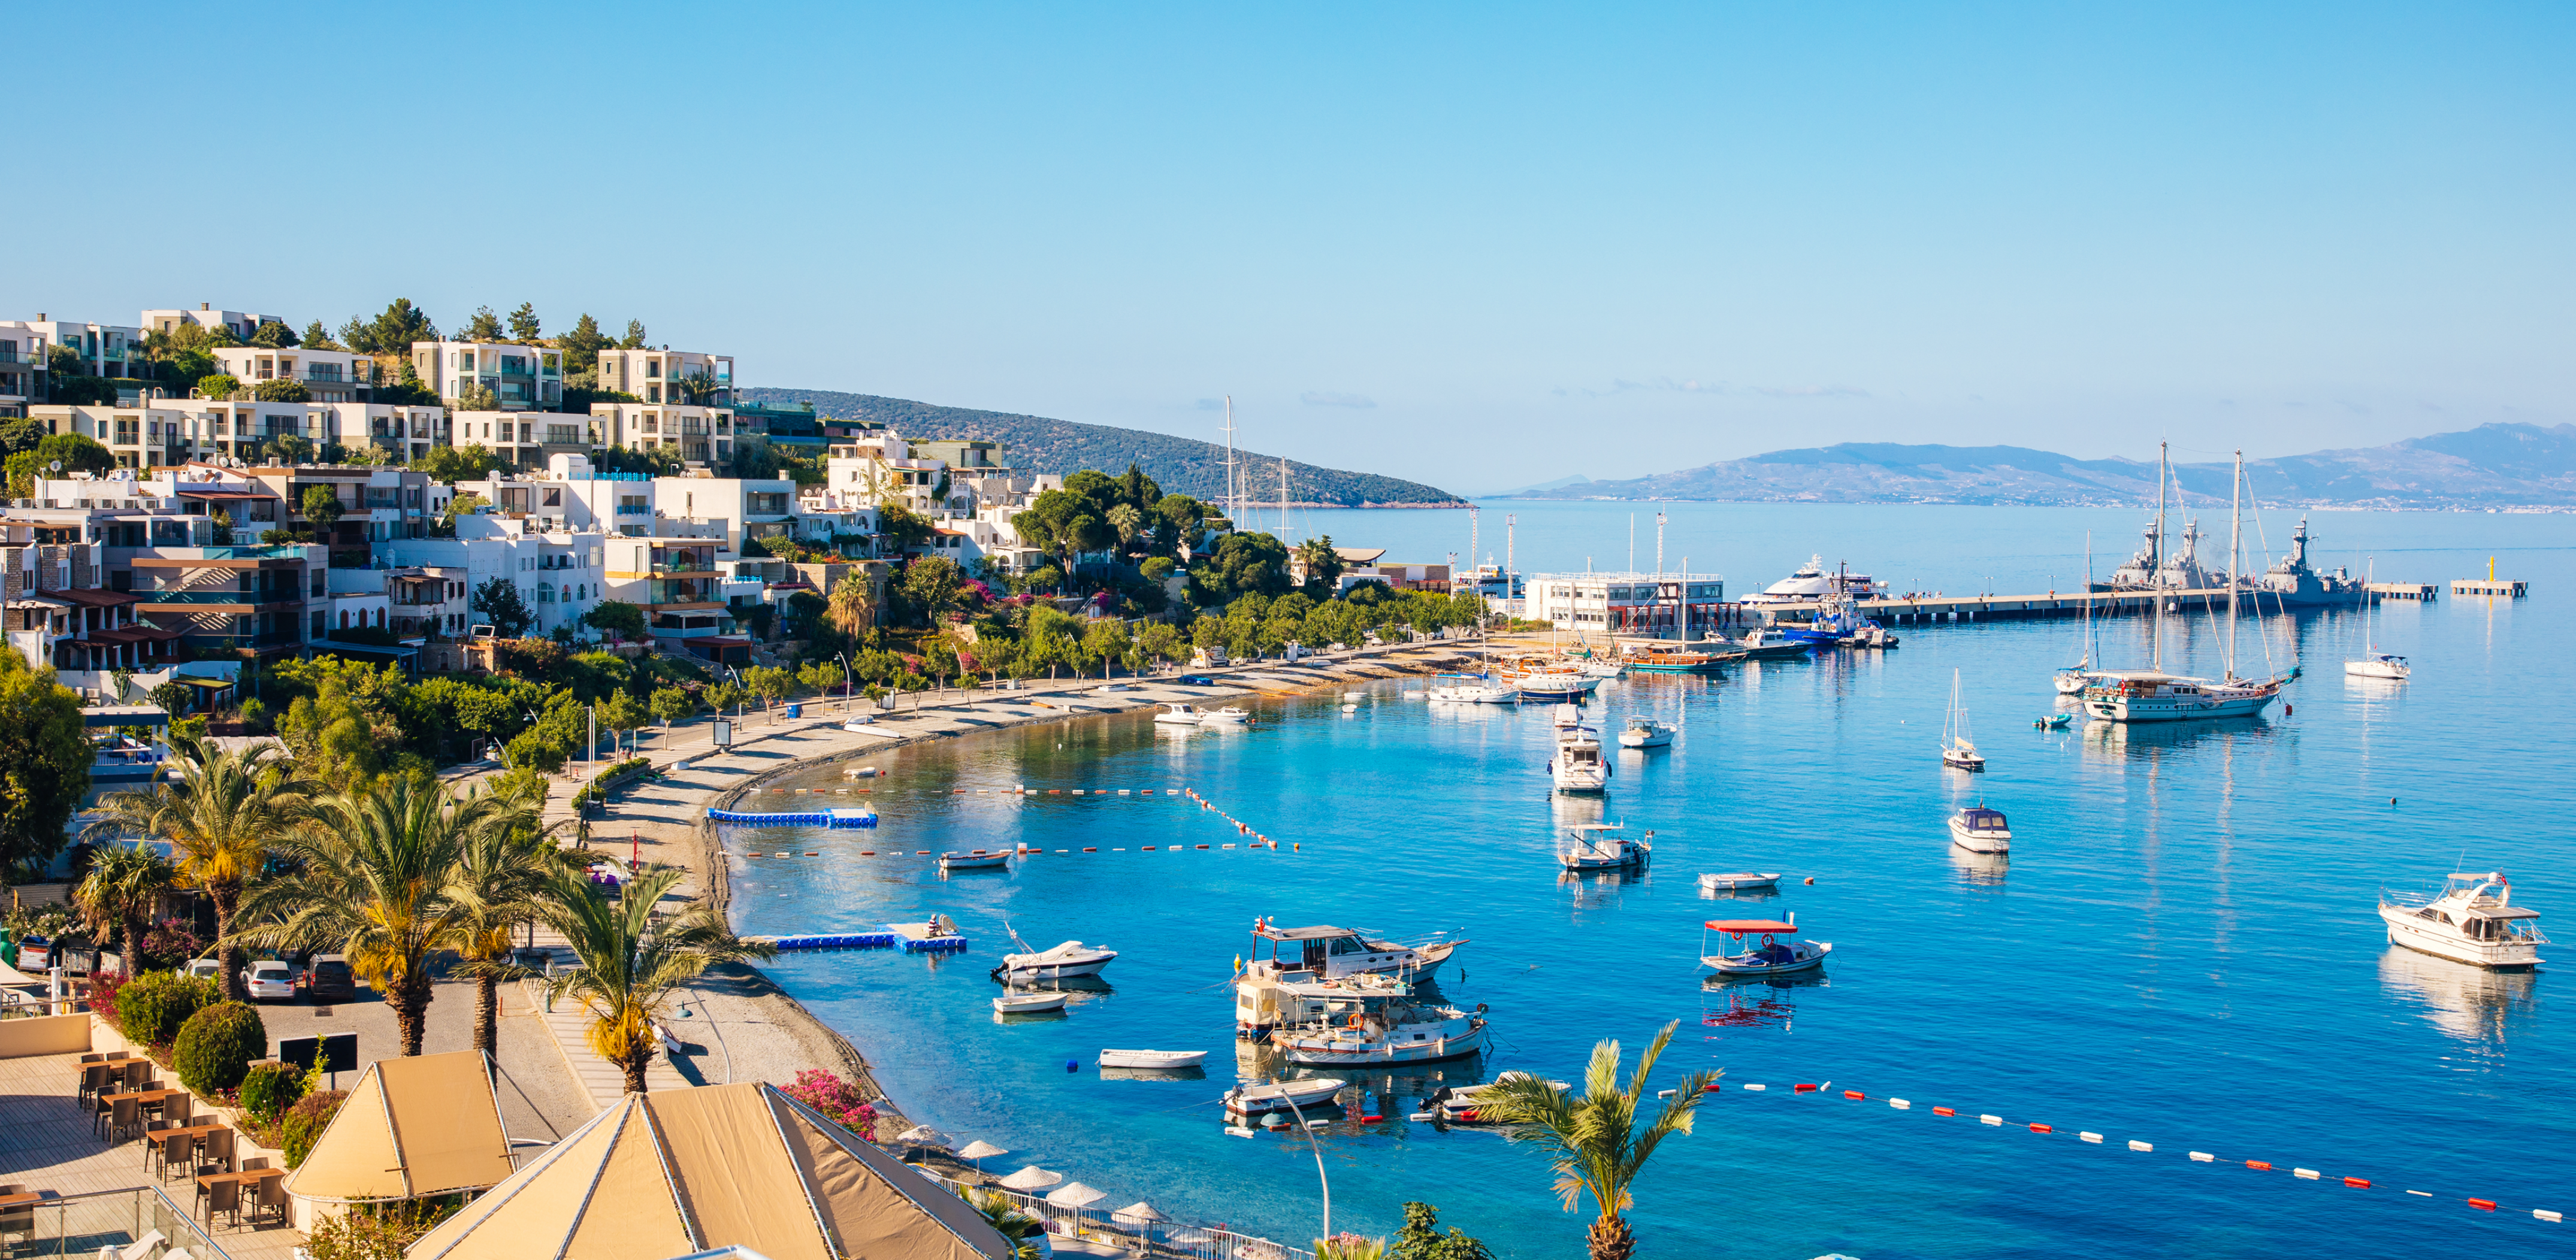 View of Bodrum